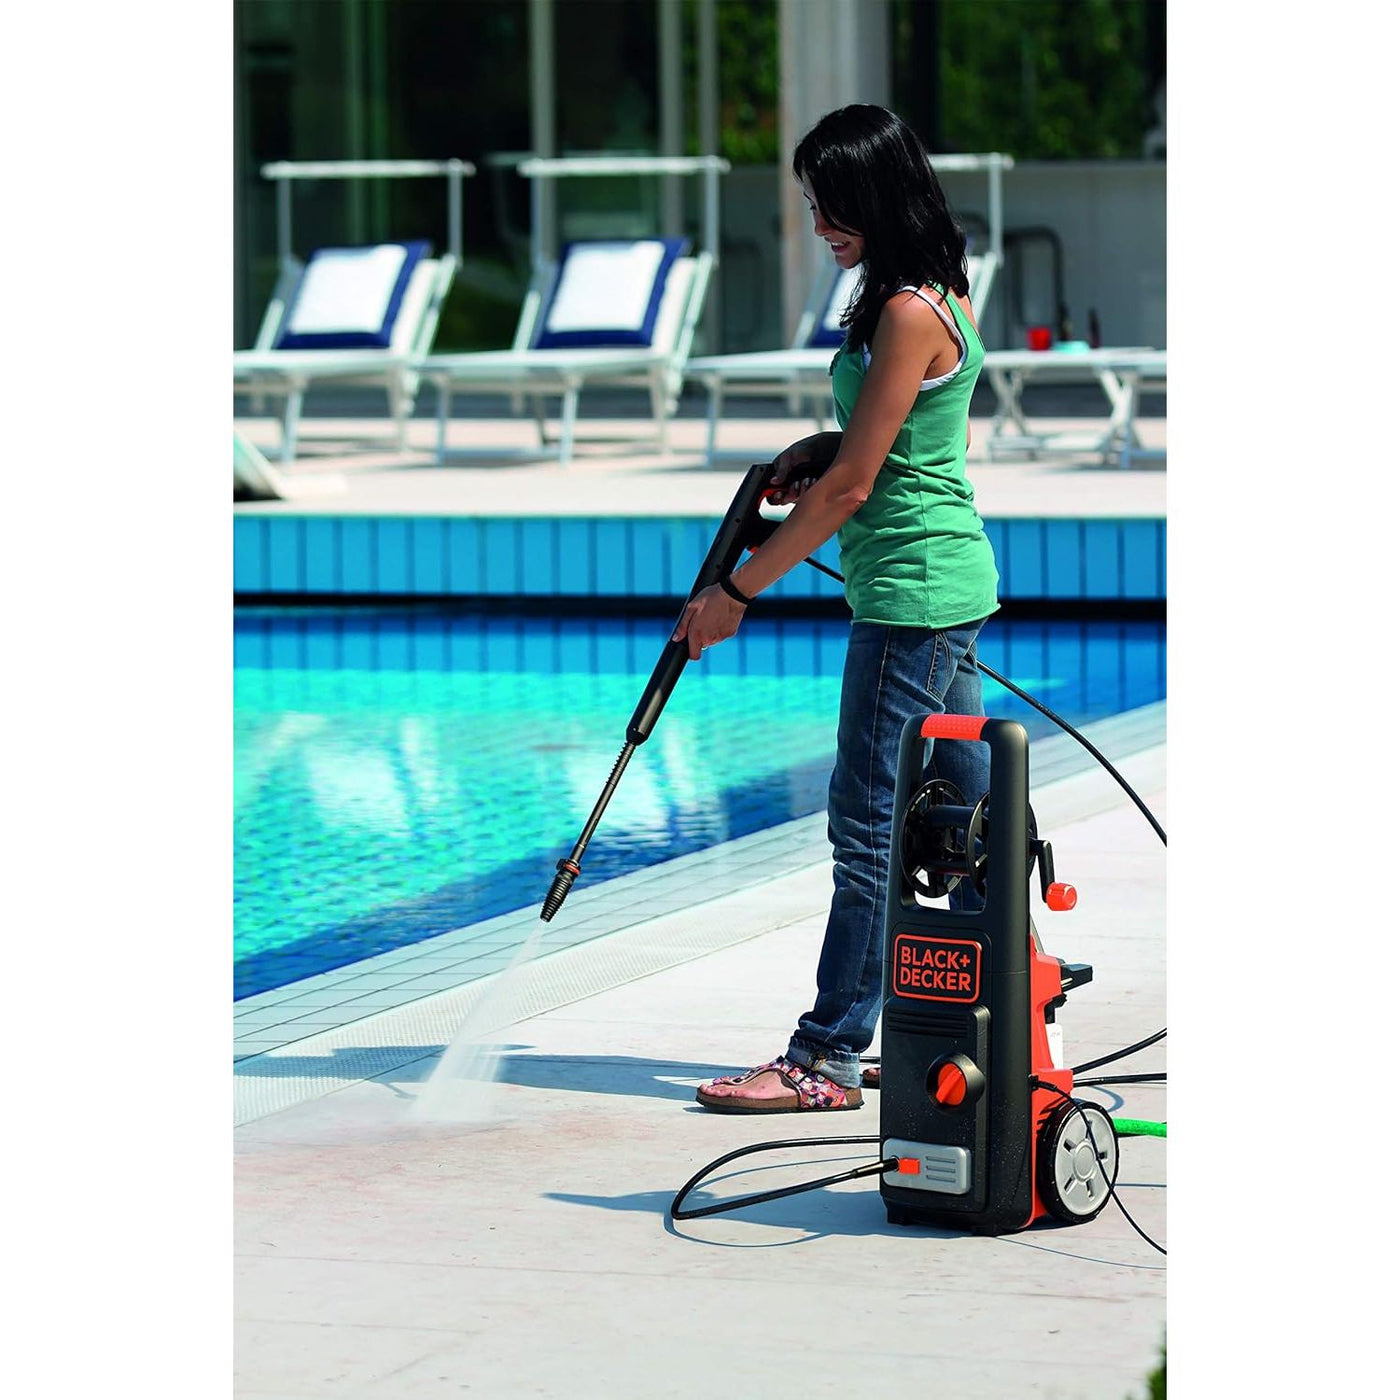 1800W 135 Bar Pressure Washer Cleaner for Home, Garden and Vehicles